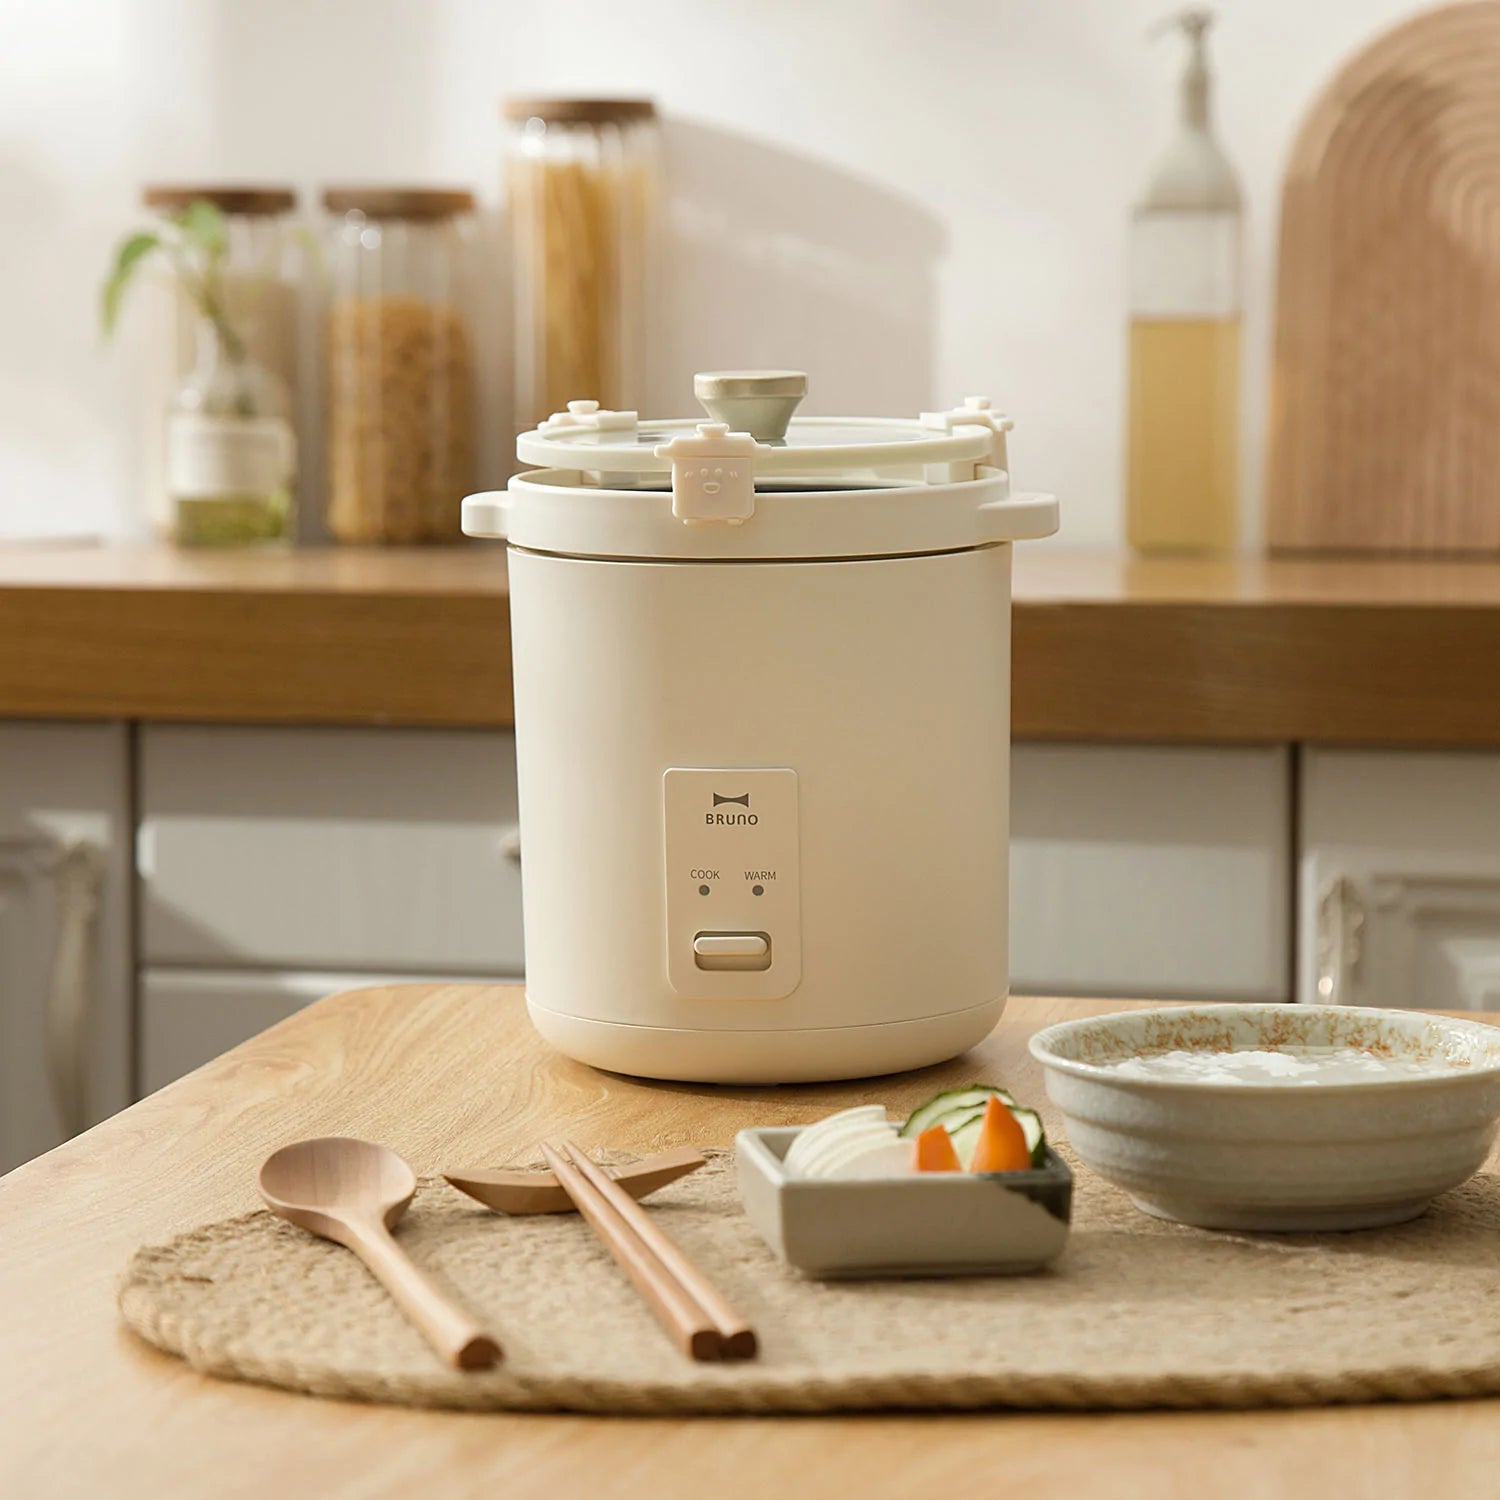 BRUNO Compact Rice Cooker - Ivory